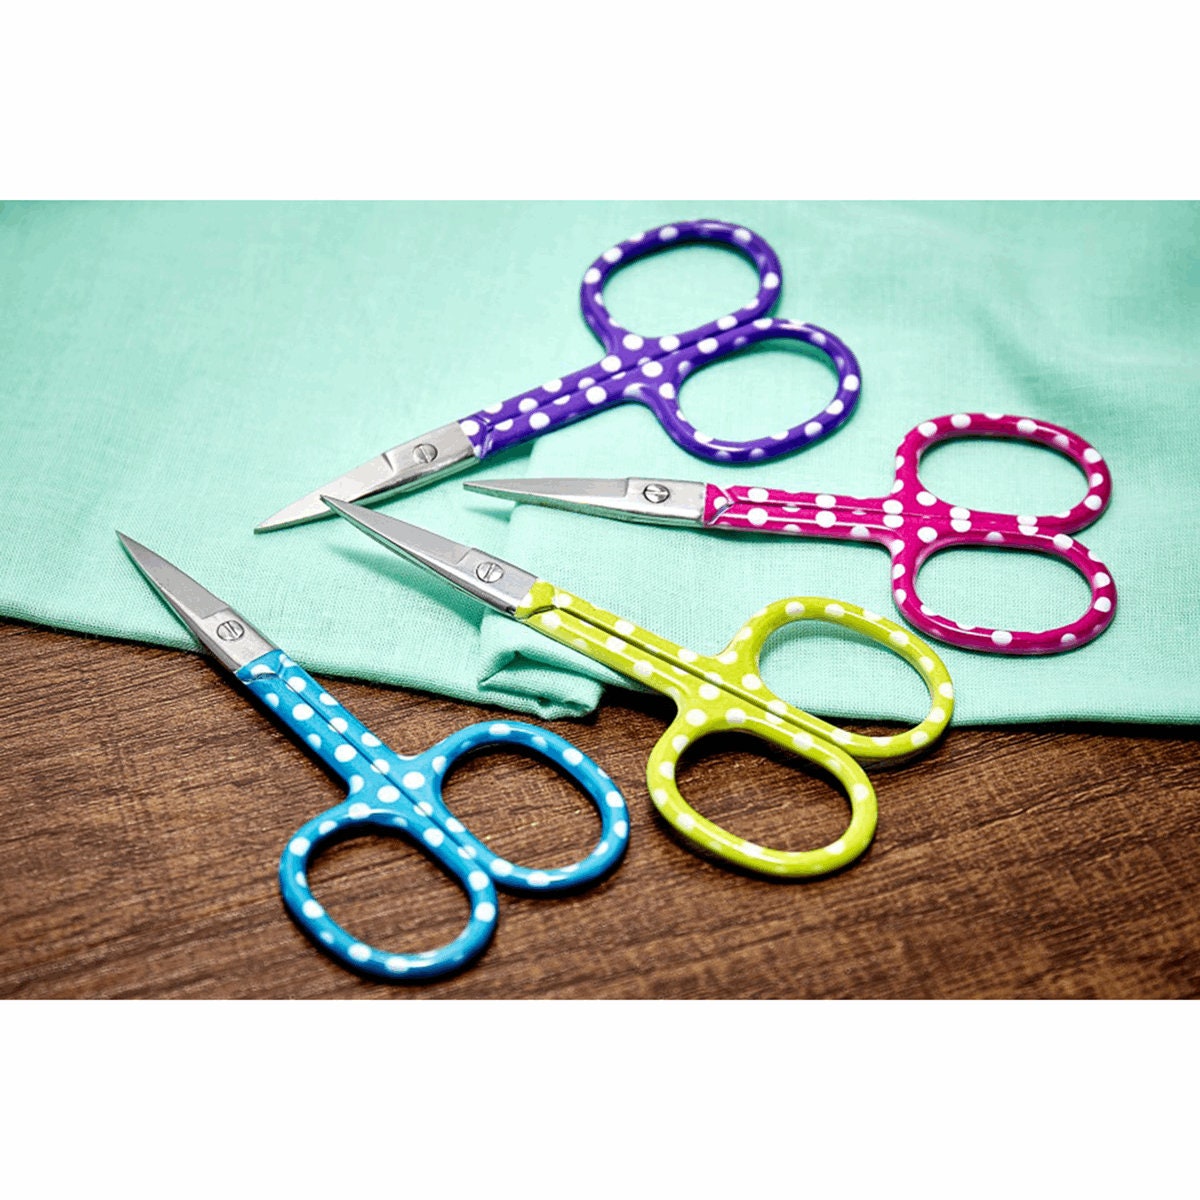  3 Pieces Mini Scissor Travel Scissors Tiny Small Scissors  Portable Snips Scissors for Sewing Craft Scissors with Cover for Women  Girls Embroidery Fabric Thread, 2.56 x 1.65 Inch (Pink) : Everything Else